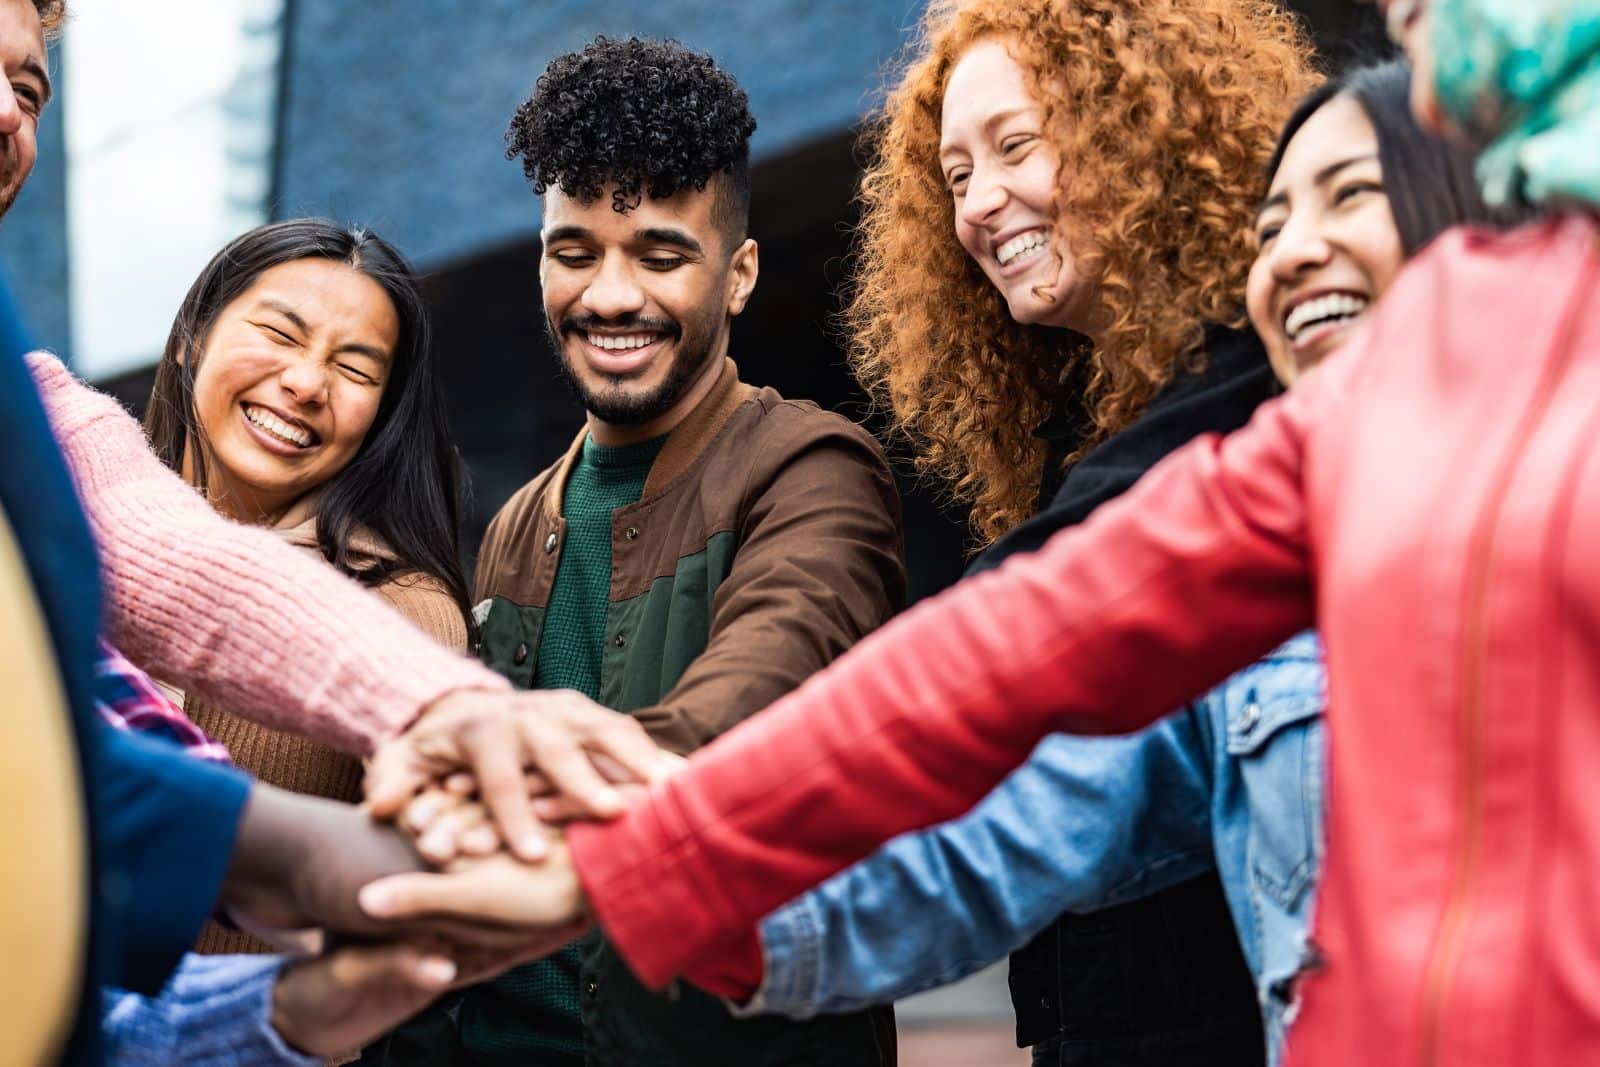 Image Credit: Shutterstock / AlessandroBiascioli <p><span>College offers more than just an education and a diploma. College often also provides a vibrant social environment, with opportunities to build lifelong friendships and connections.</span></p>